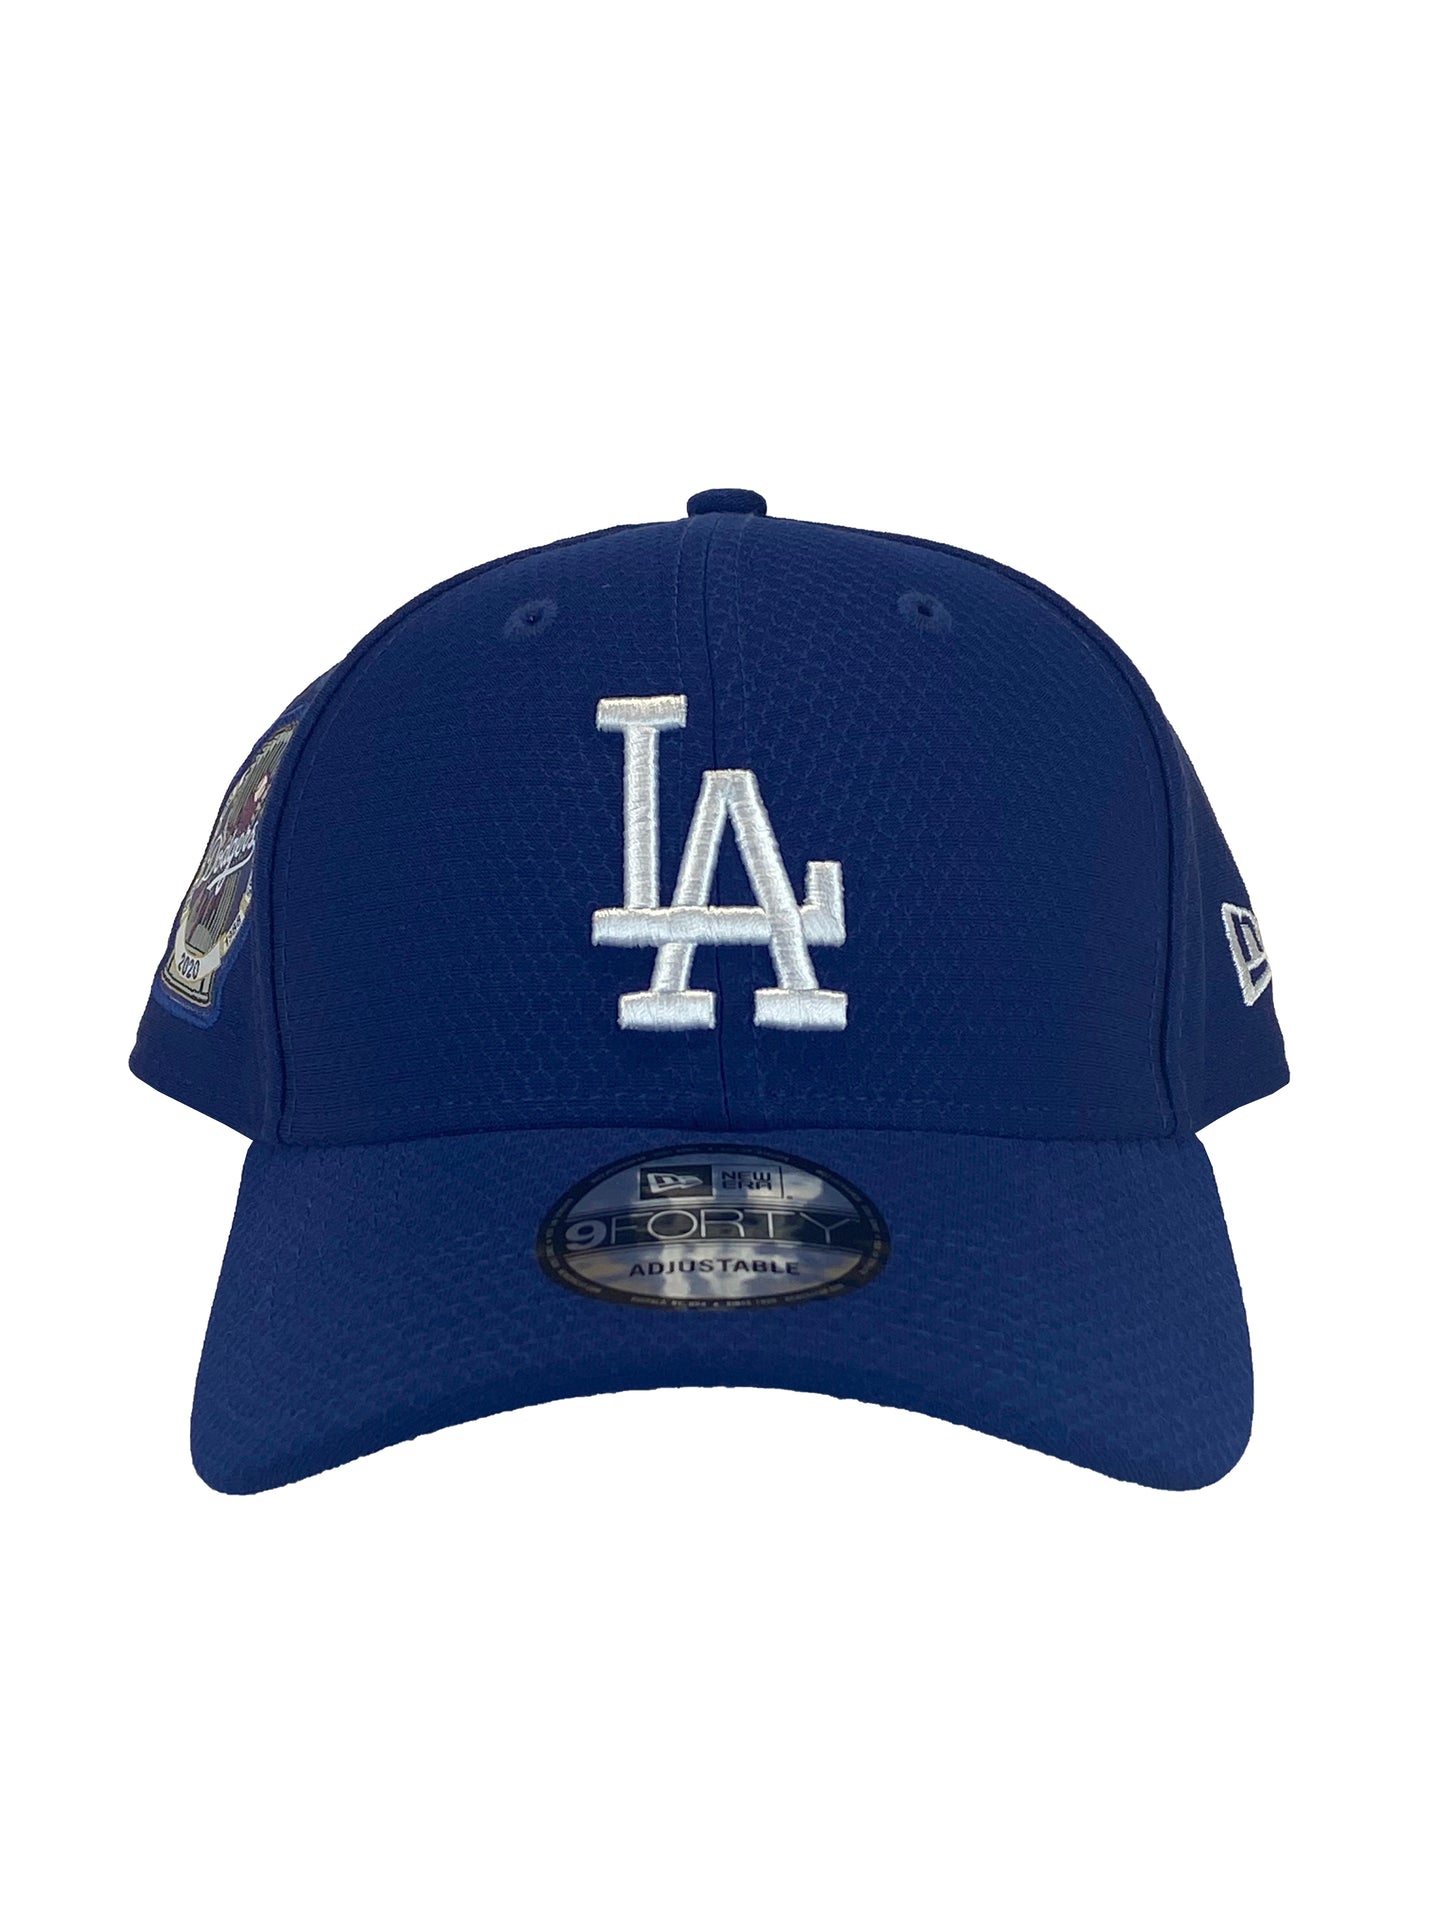 LOS ANGELES DODGERS GLORY 9FORTY AJUSTABLE